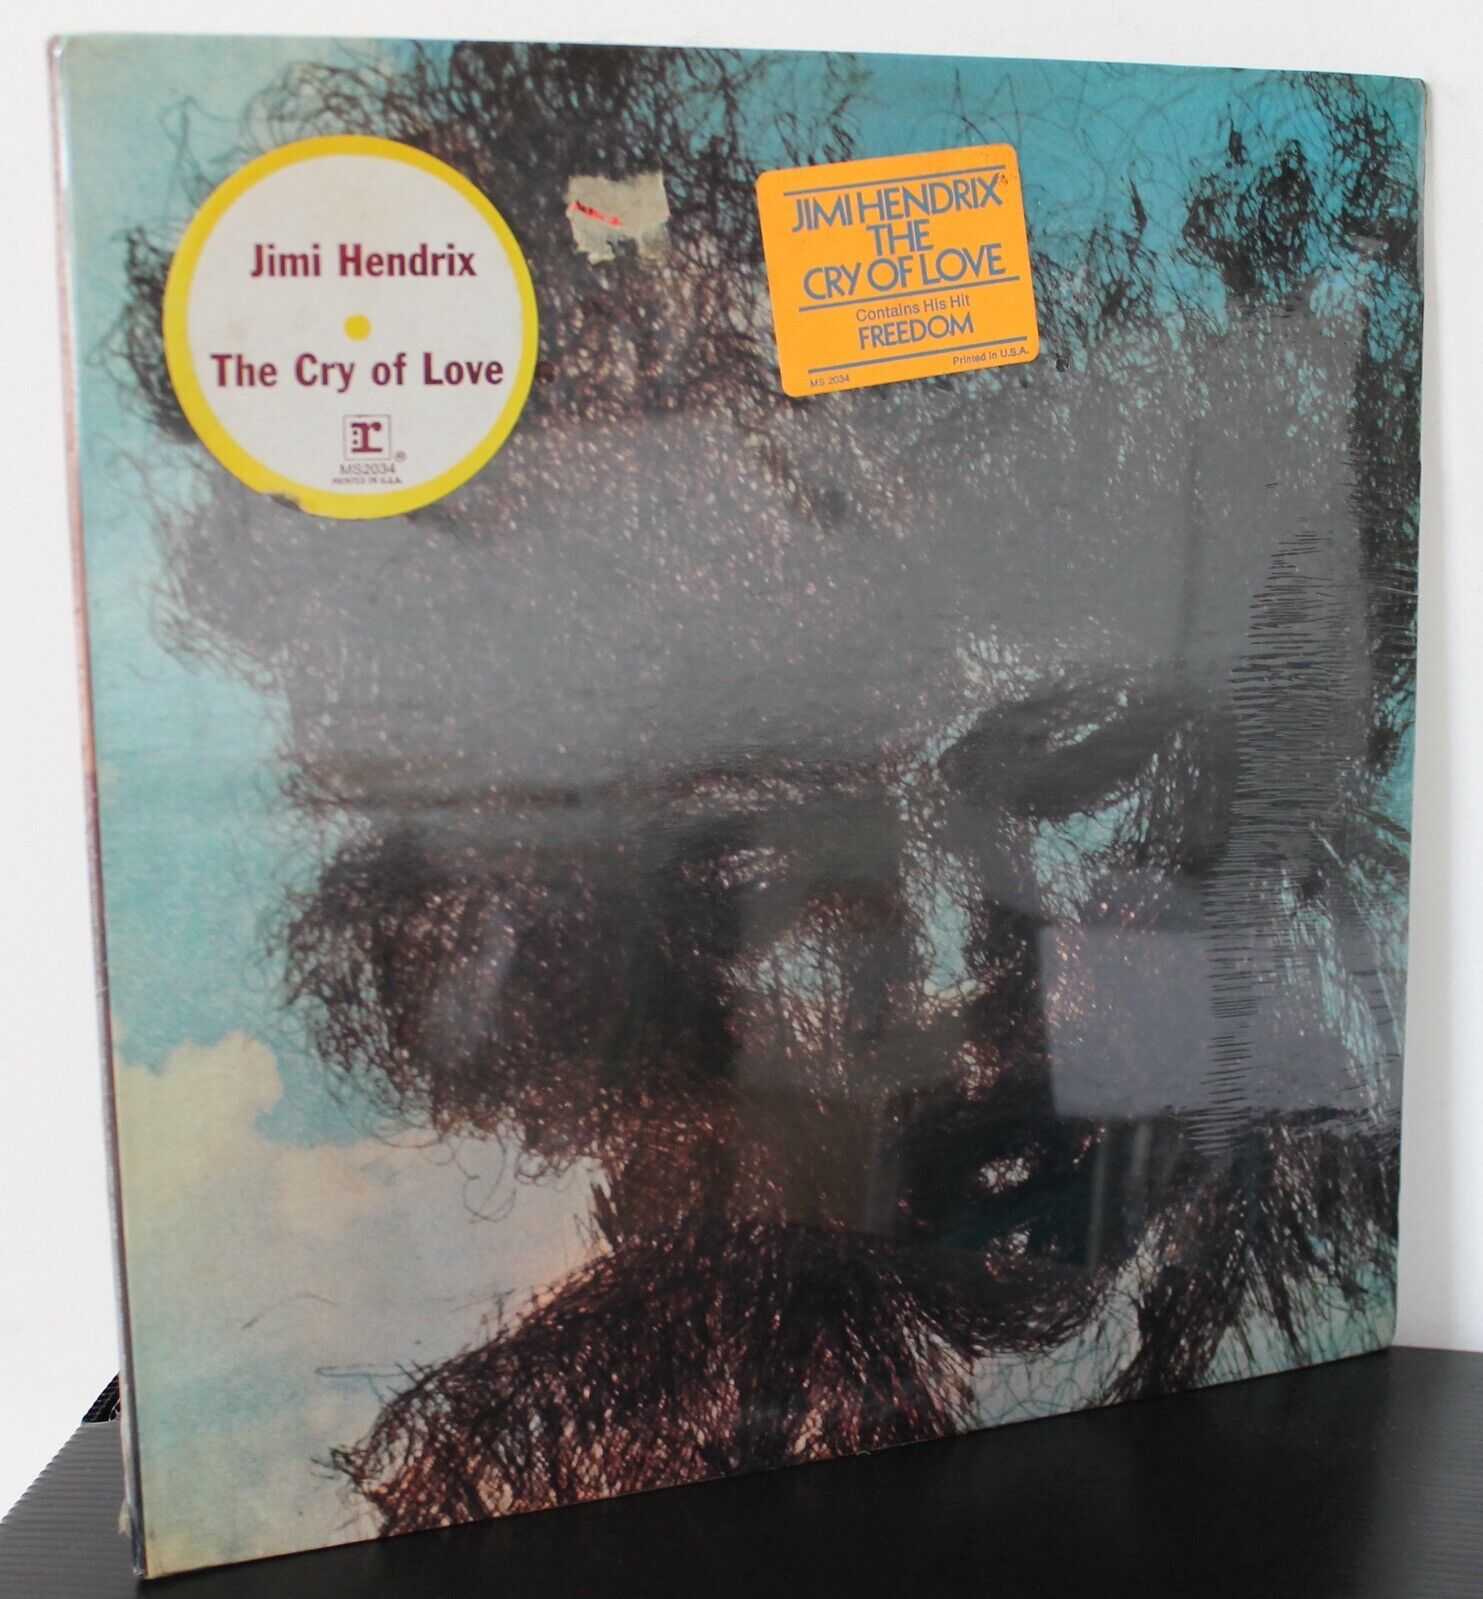 JIMI HENDRIX Cry Of Love LP (Reprise MS 2034, orig 1971) SEALED w/ Hype Stickers